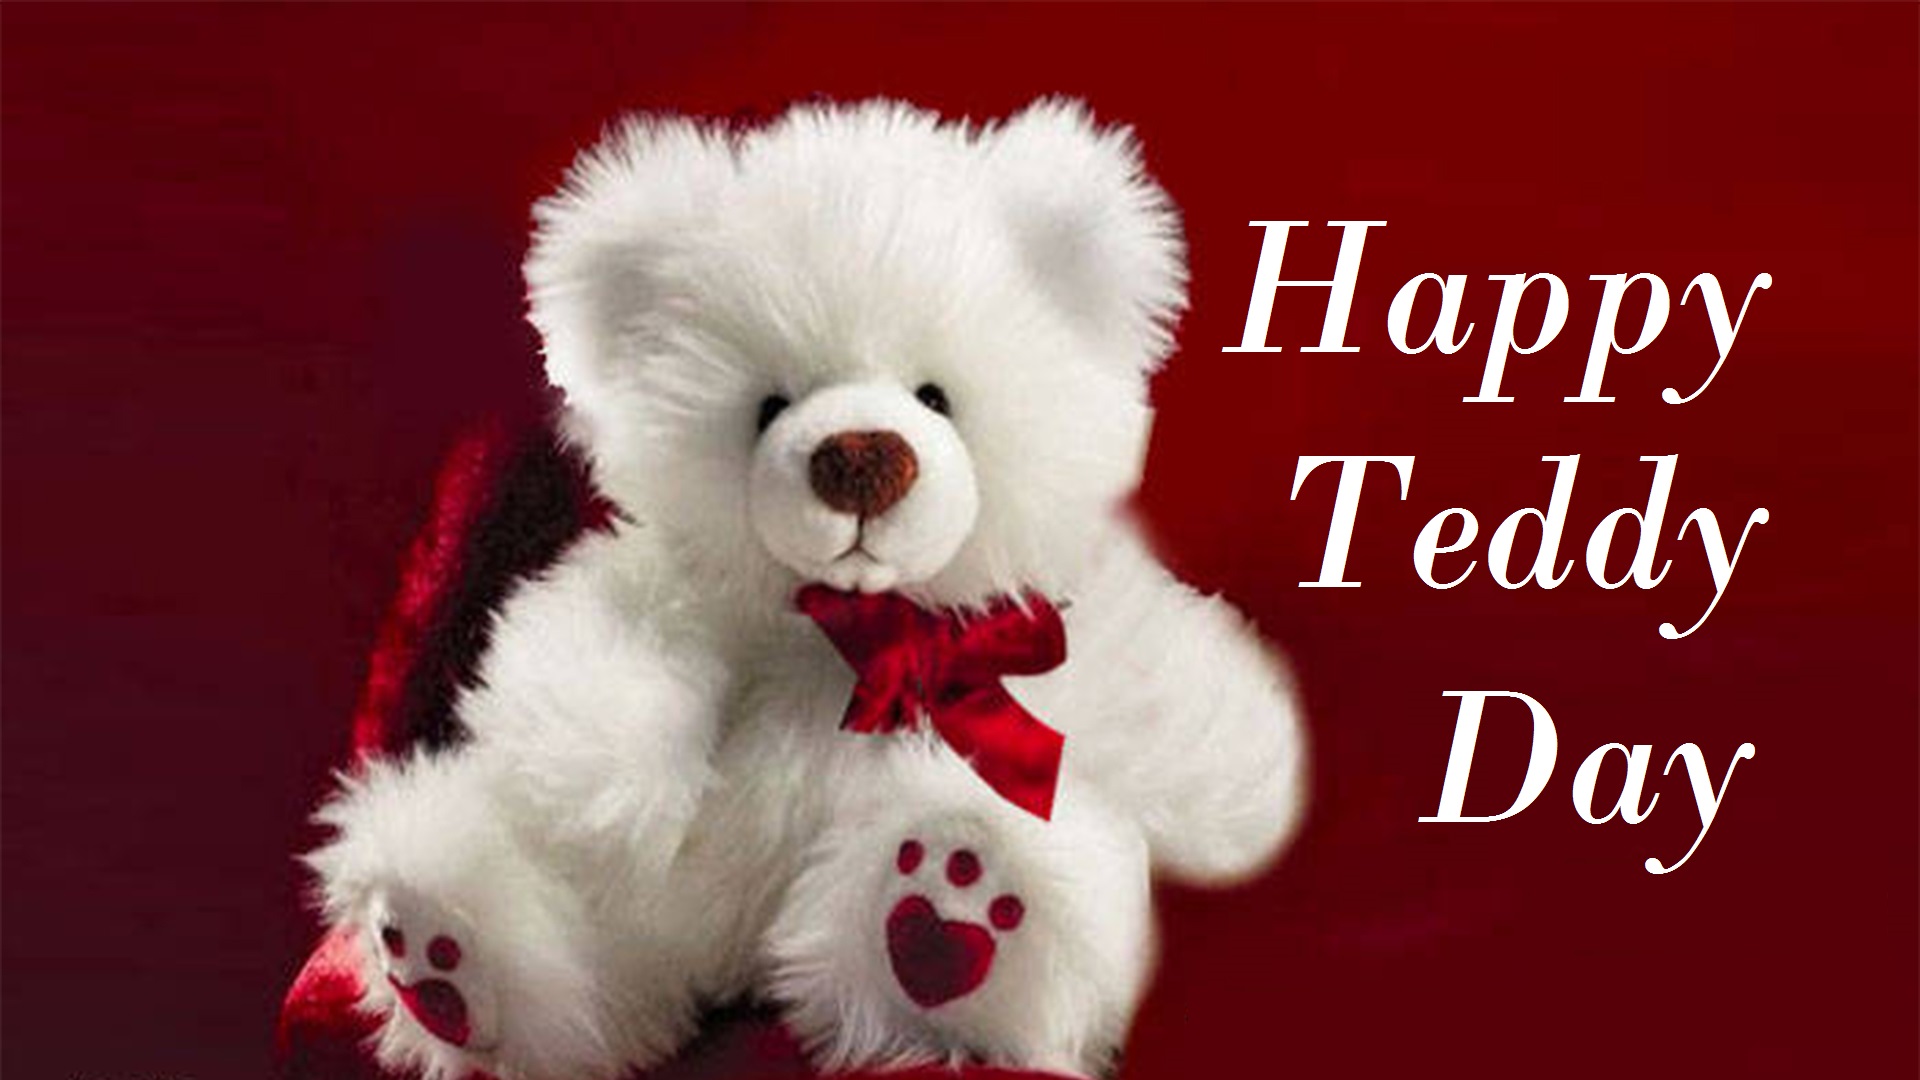 Happy Teddy Day Images - White Teddy Bear With Roses - HD Wallpaper 